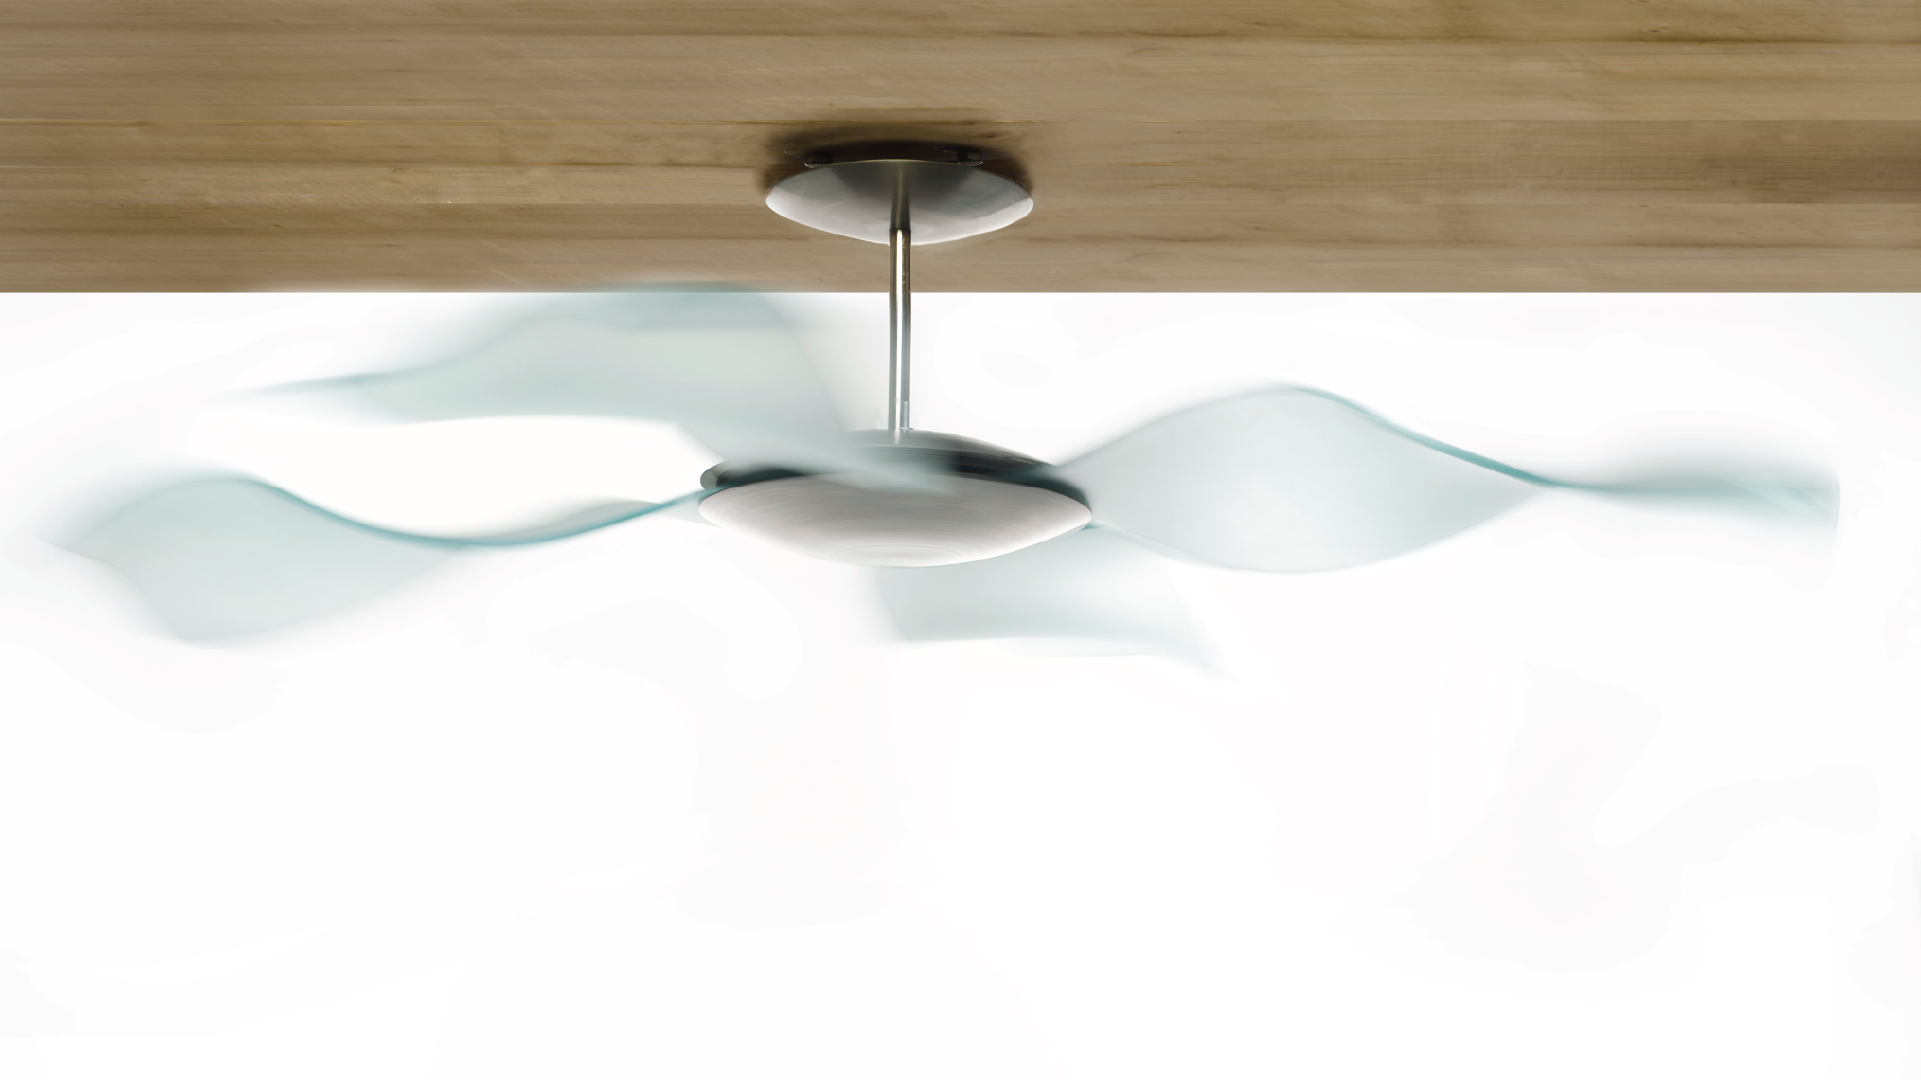 Fan with glass propellers in movement.